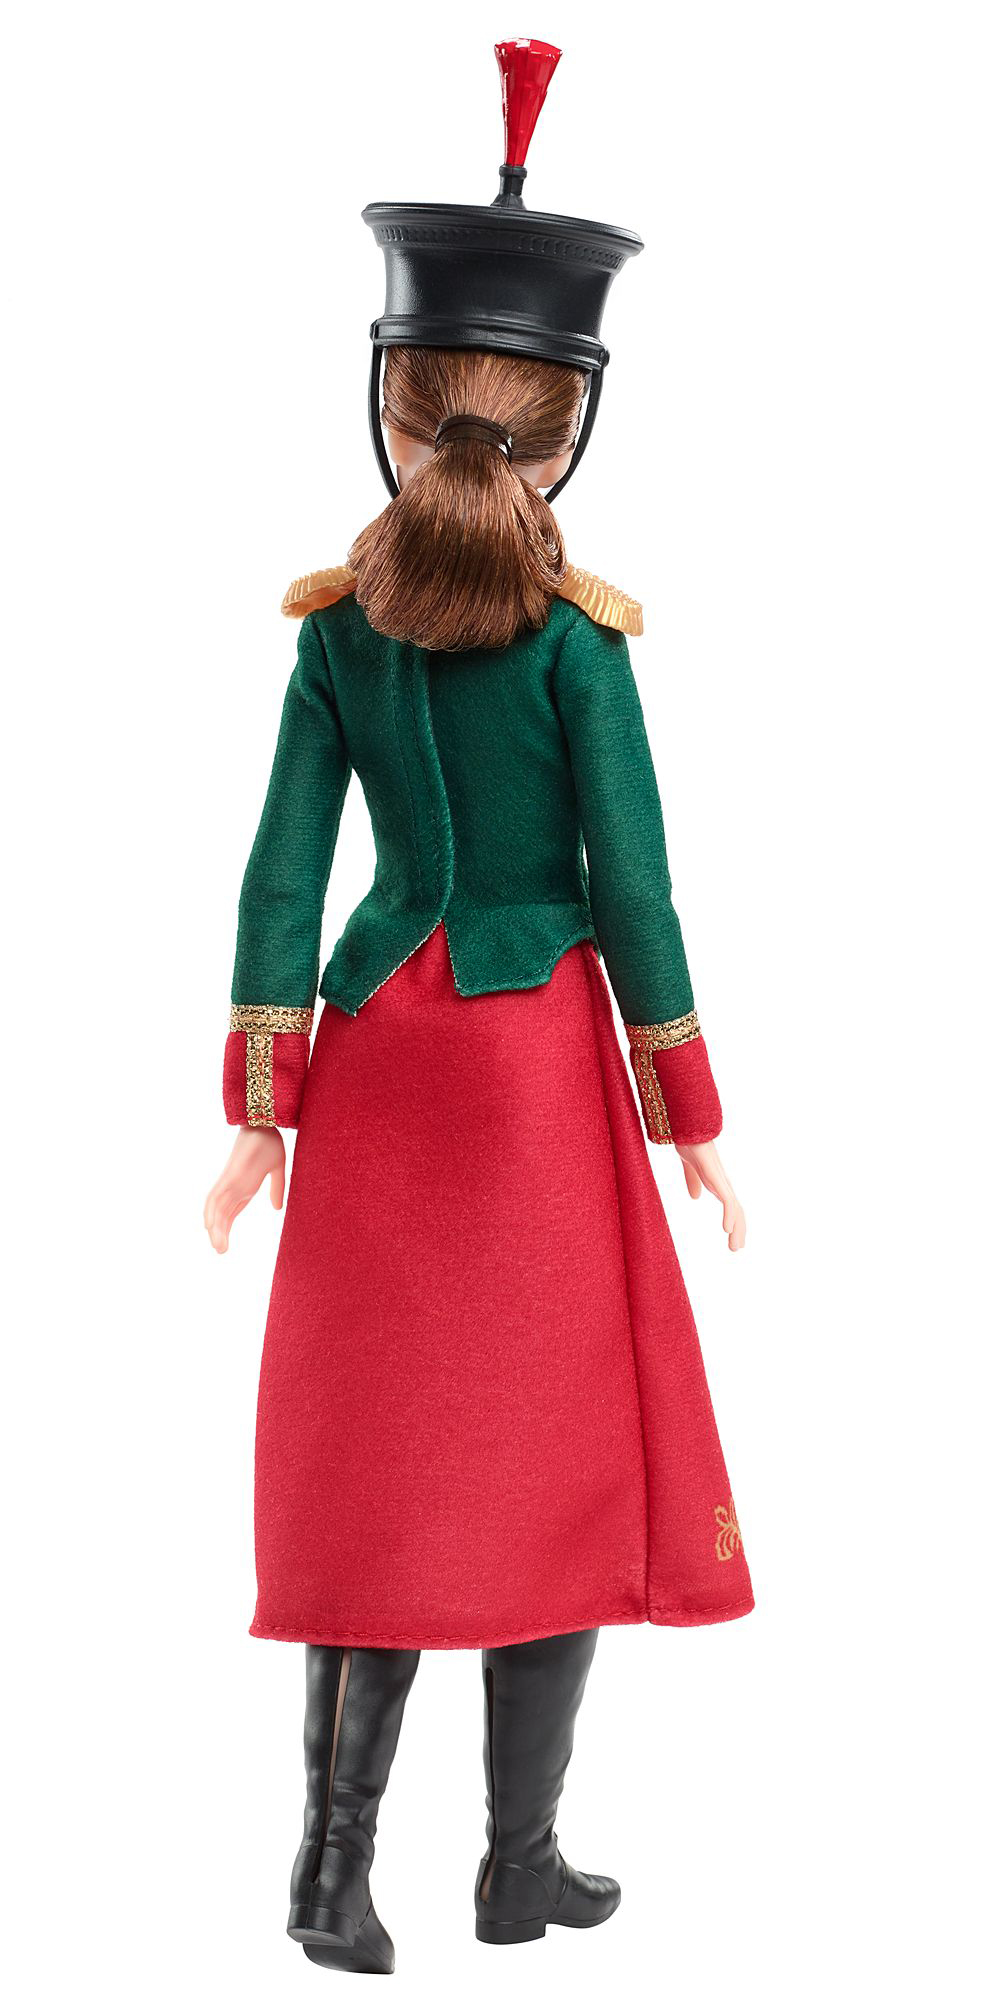 Details about   Disney The Nutcracker and the Four Realms Clara's Soldier Uniform Barbie Doll 